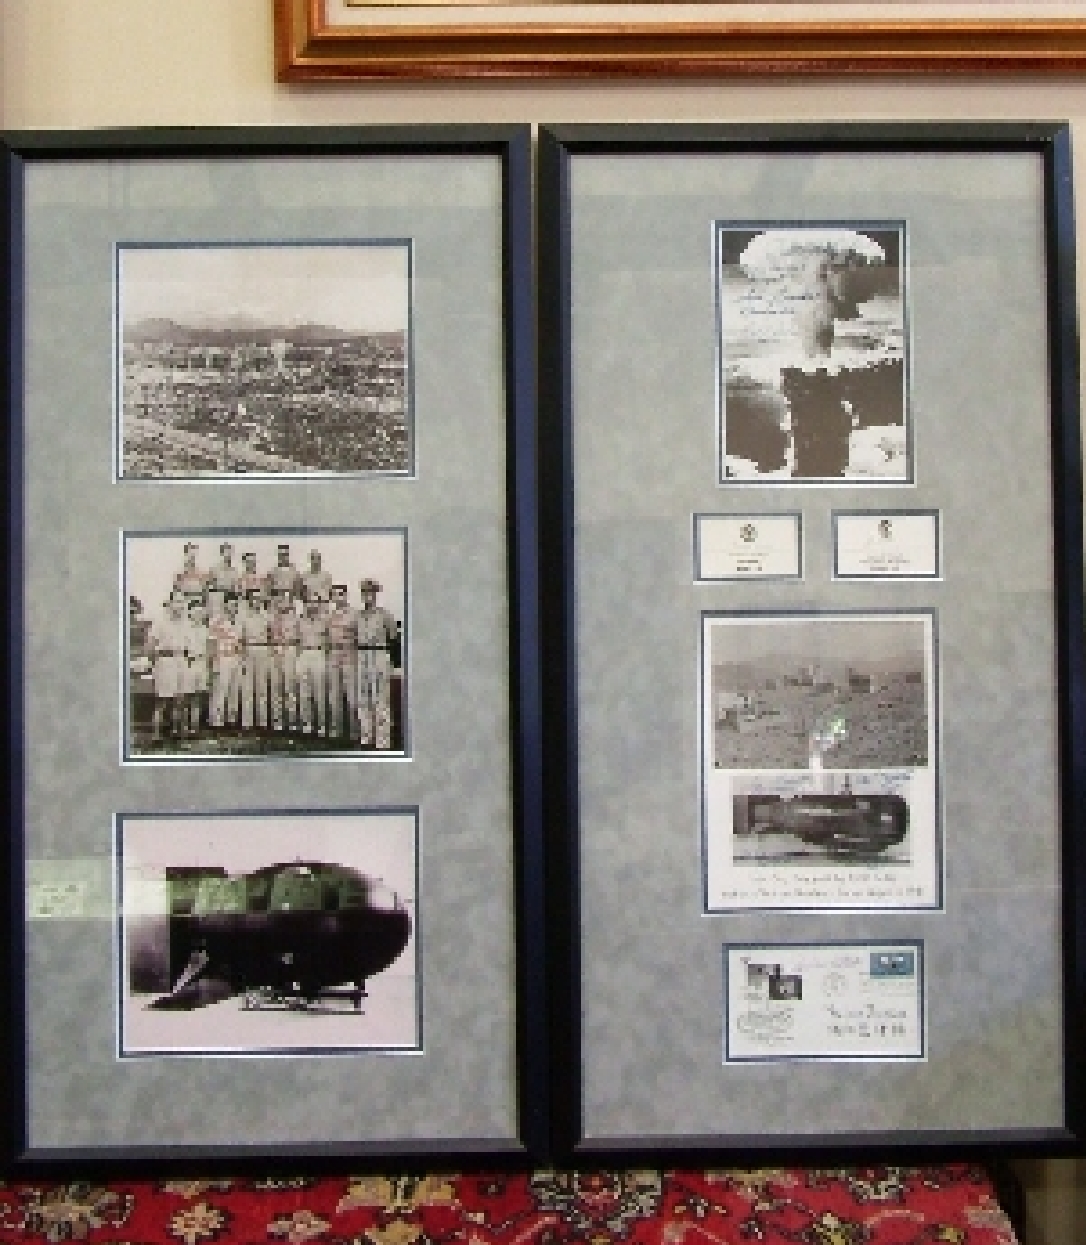 Set of two UV proof conservation display framed collections of World War 2 Enola Gay crew and D Day autographed memorabilia. 
One unsigned photo of Nagasaki; one photo of Bockscar crew signed in 1945 by Ray Gallagher; Fred J Olivi; John D Kuhareck; Charles Donald Albury; Charles Sweeney; and Frederick Ashworth. 
One photo of mushroom cloud signed by Paul Tibbets;  Dutch  Van Kirk; Tom Ferebee; and Richard Nelson. Two signed cards; George Caron and Jacob Beser. One signed composition photo of Hiroshima and Little Boy signed by Tom Ferebee; Dutch Van Kirk; Paul Tibbets; and Richard Nelson. One 1965 International Cooperation Year cachet postcard signed by Paul Tibbets and Mitsuo Fuchida. 